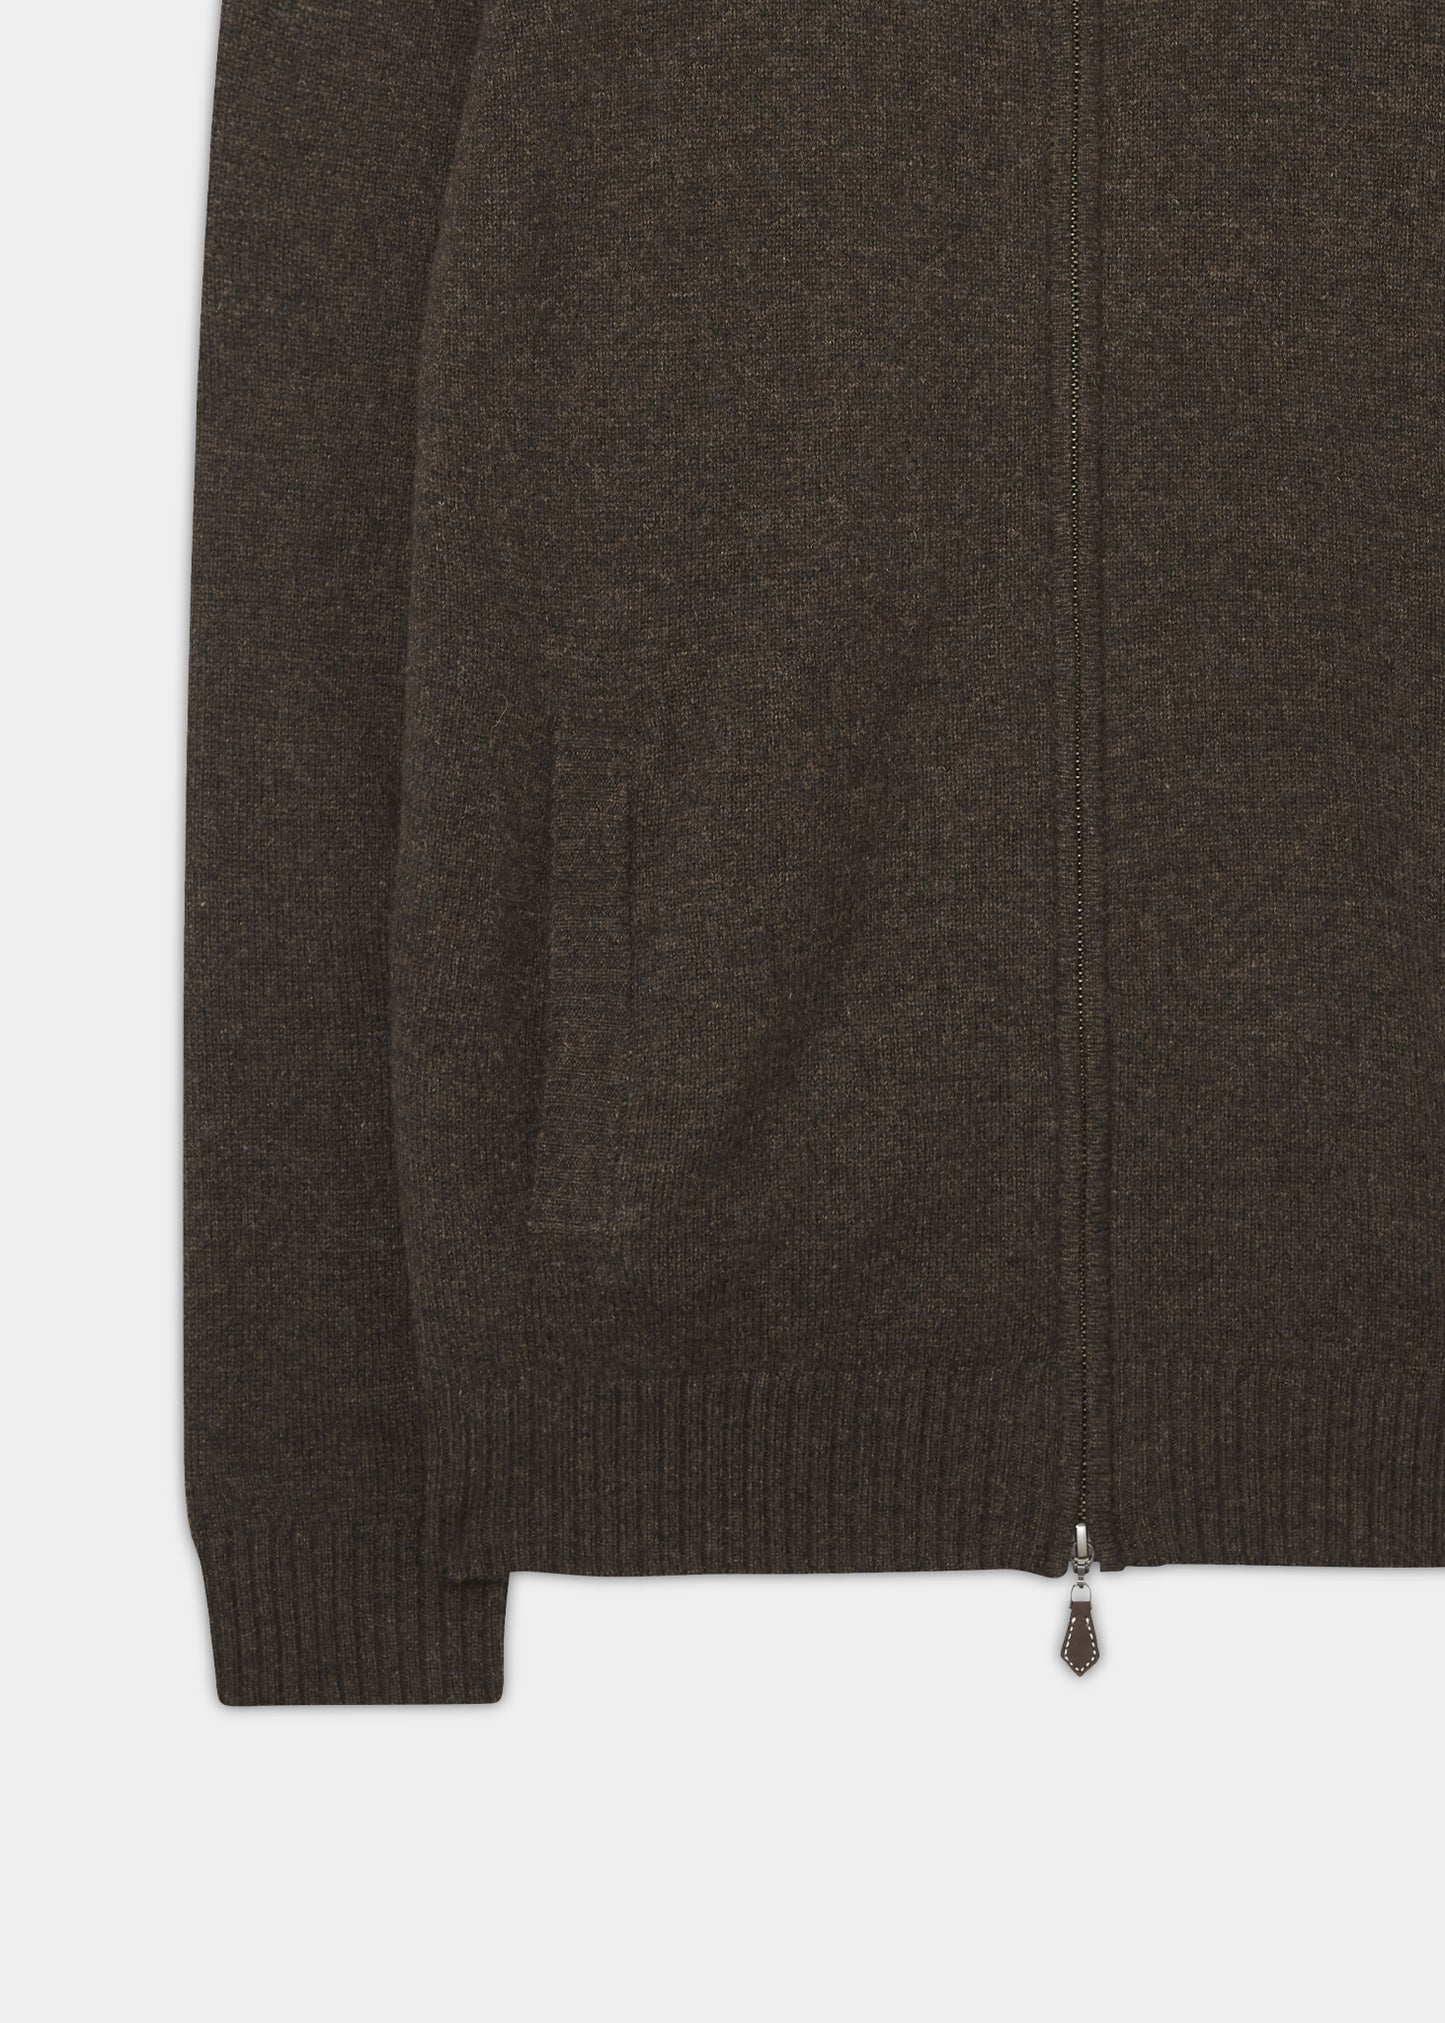 Ballater Lambswool Zipped Jumper in Cocoa 